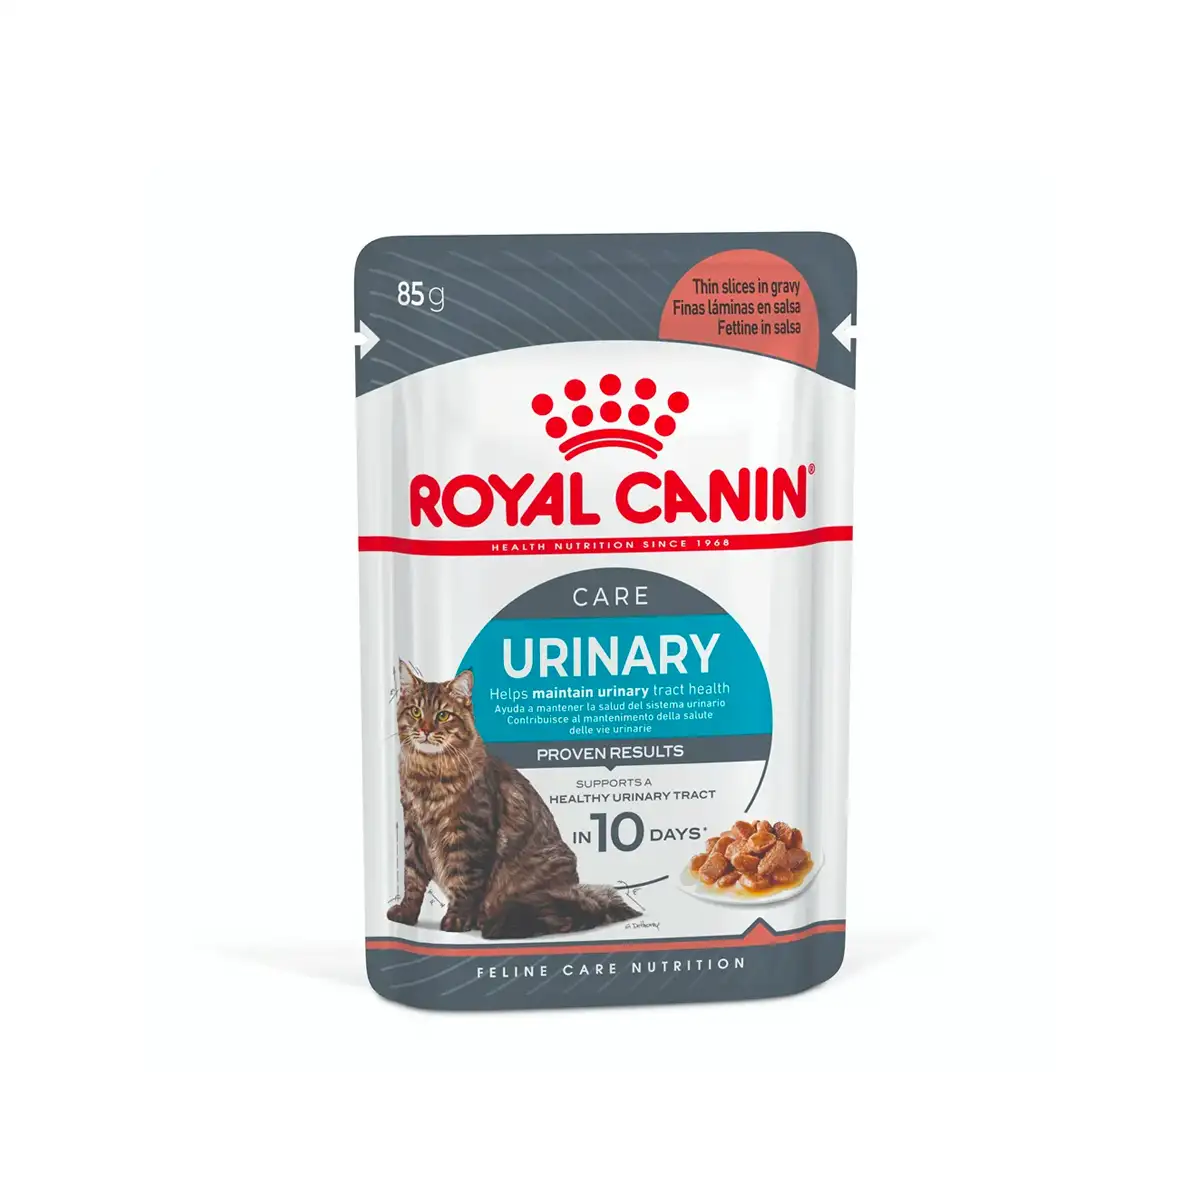 Royal Canin - Care Urinary Wet Food in Gravy 85g